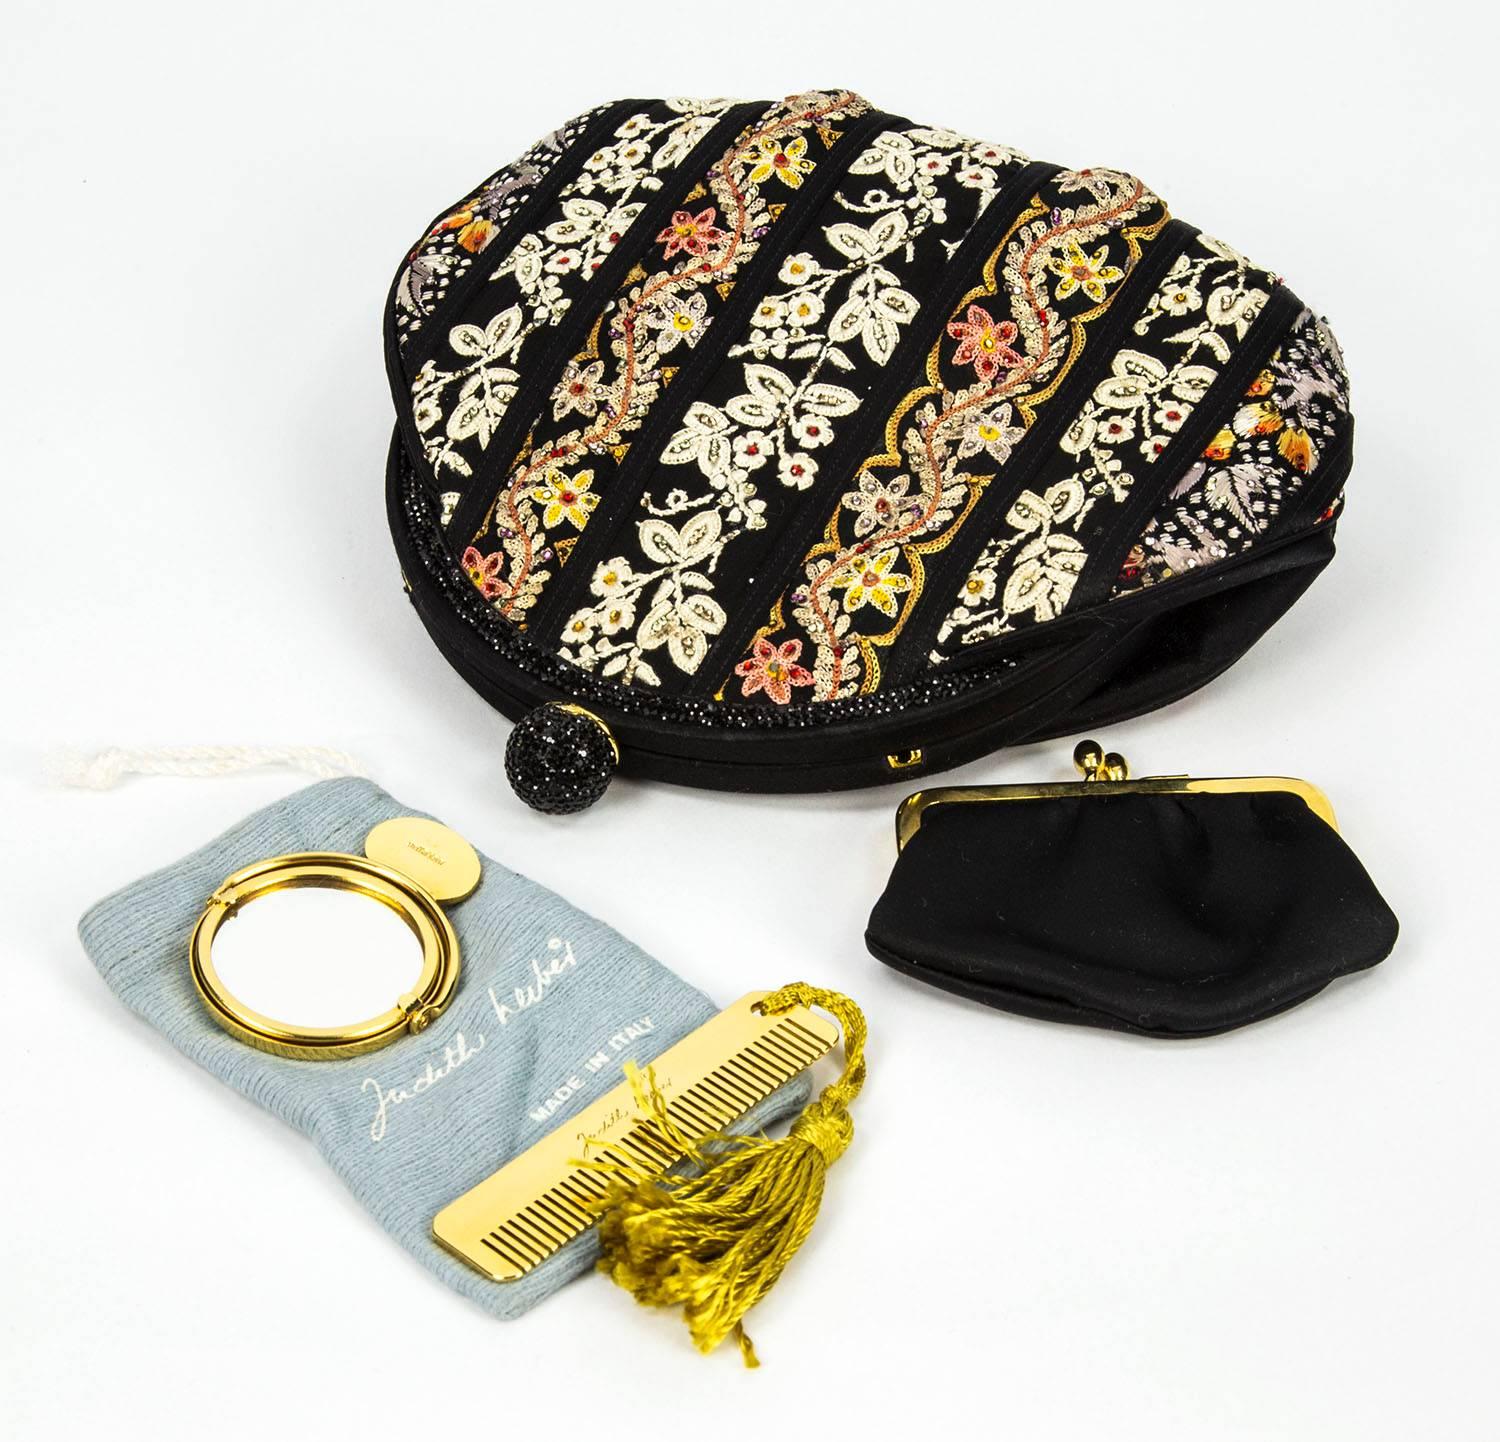 Beautiful Judith One-of-a-Kind Judith Leiber Antique floral design Ribbon Black with Multi Crystals Evening Bag; can be carried as a shoulder bag or straps can be tucked inside for a clutch. Comes with comb, mirror, coin purse and Logo dust bag. Add